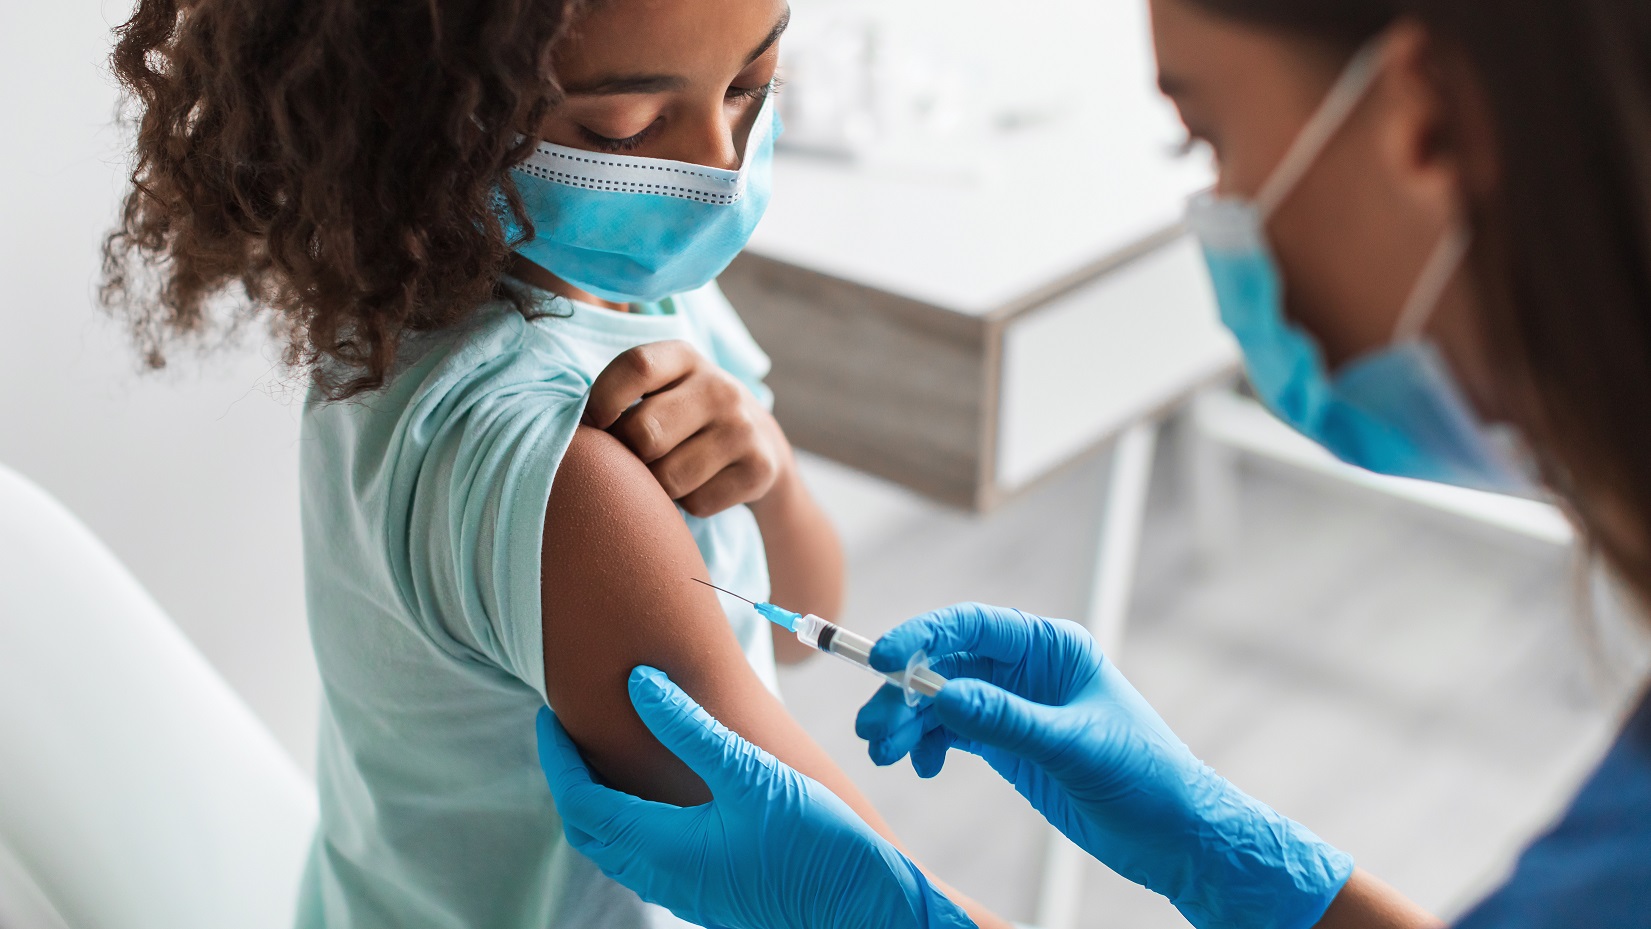 CA Seeking To Pass Bill That Allows Preteens To Get Vaccinated Without Parental Consent